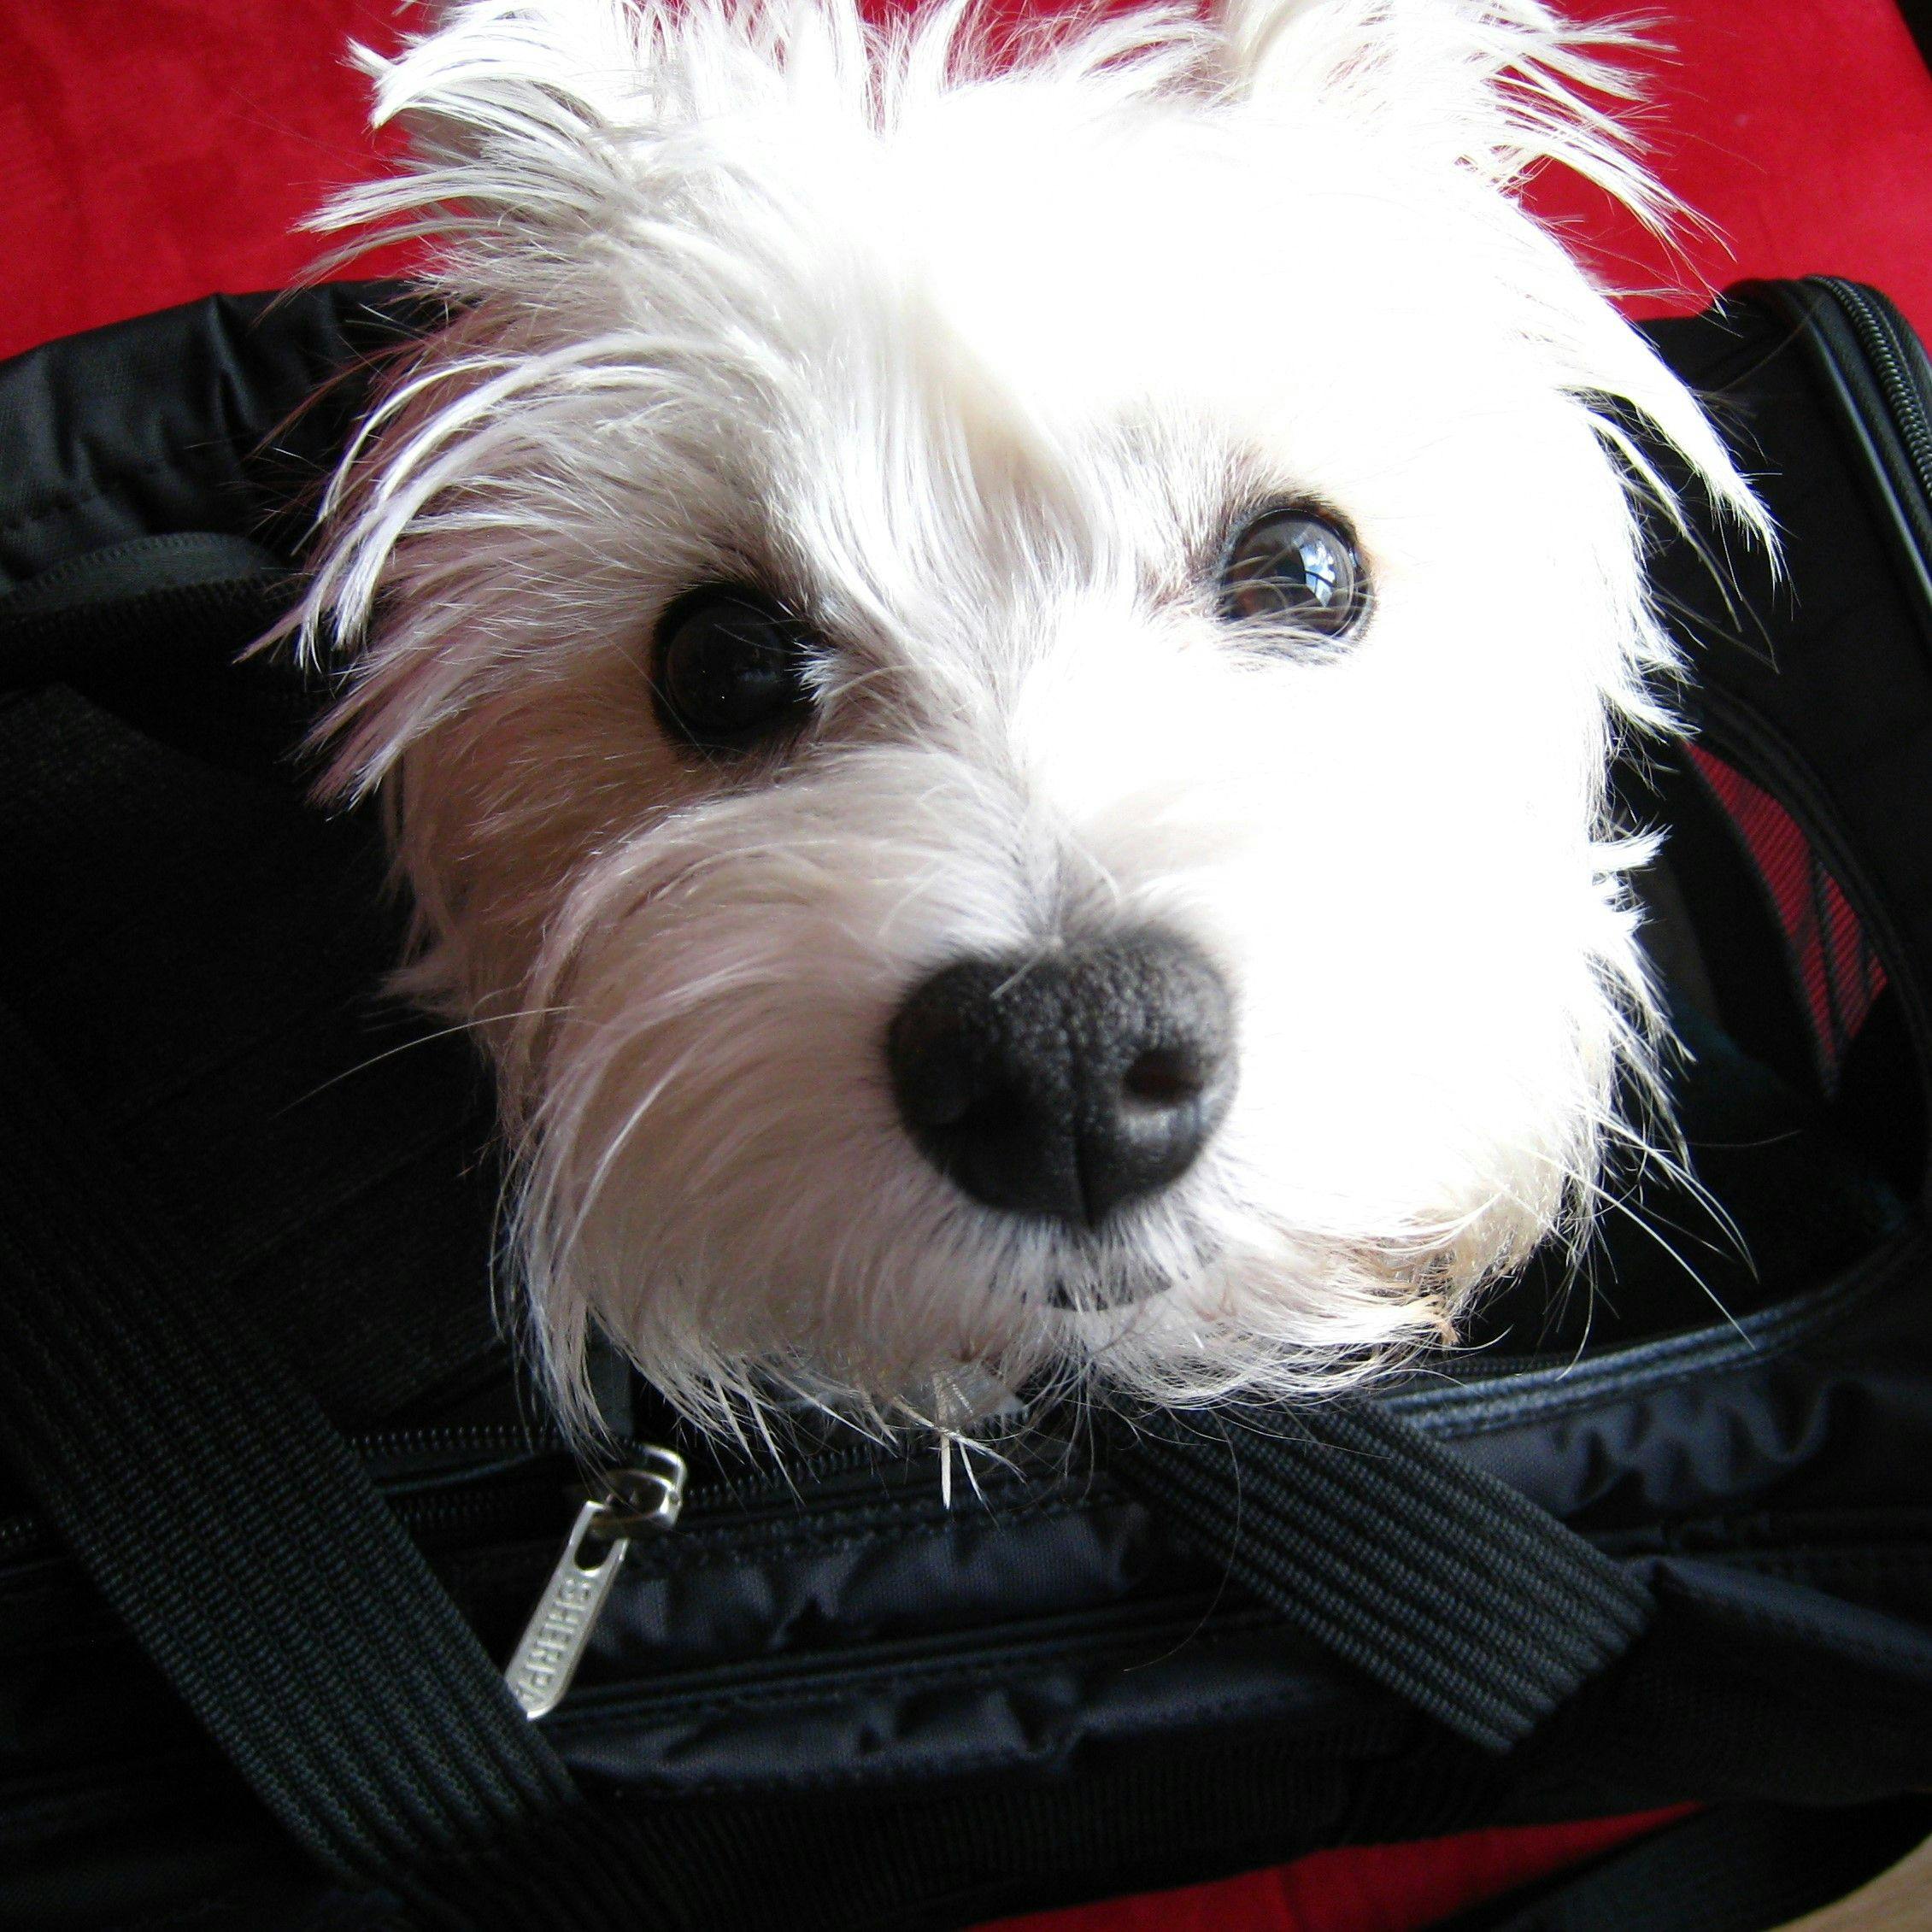 There are several key steps in preparing your dog for a safe and pleasant journey, according to our travel writer. (Photo courtesy of Candyce H. Stapen)